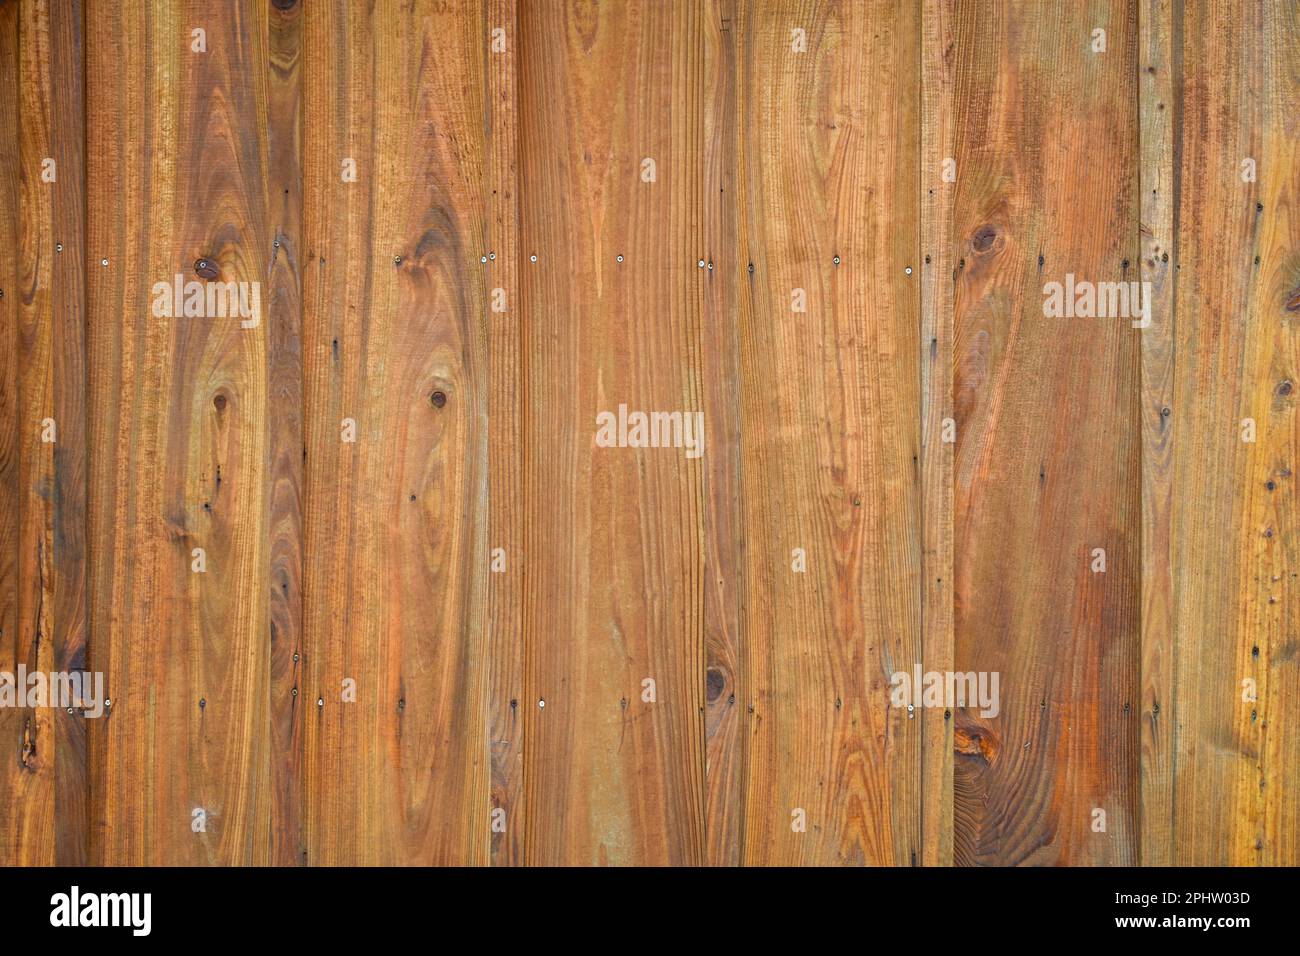 Natural wood board and batten background Stock Photo